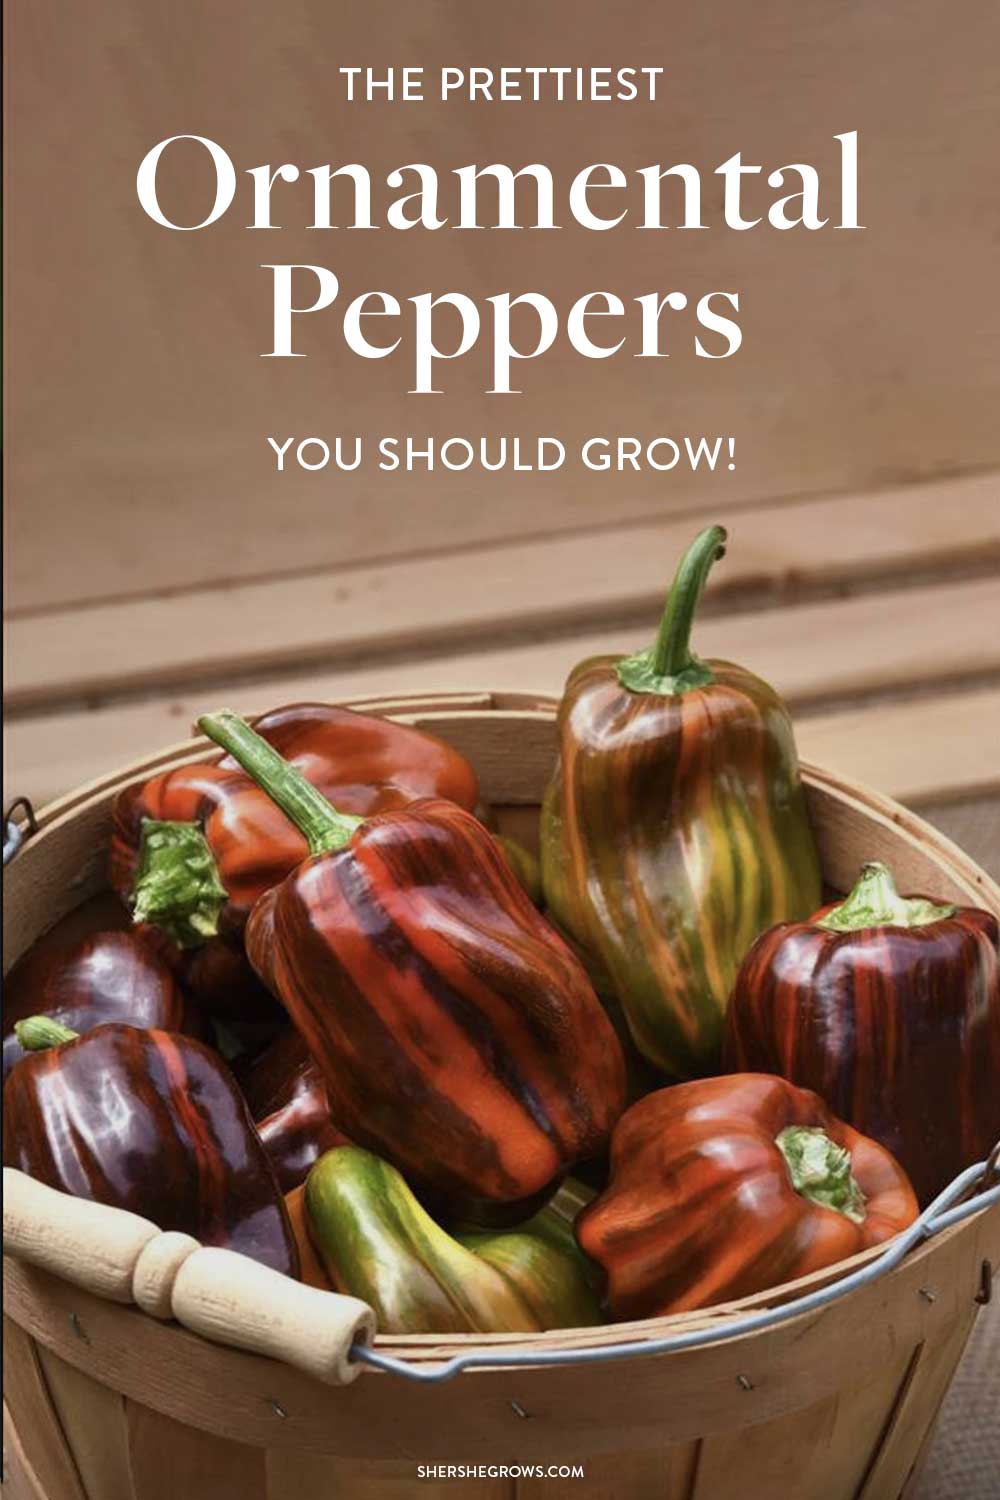 types-of-ornamental-peppers